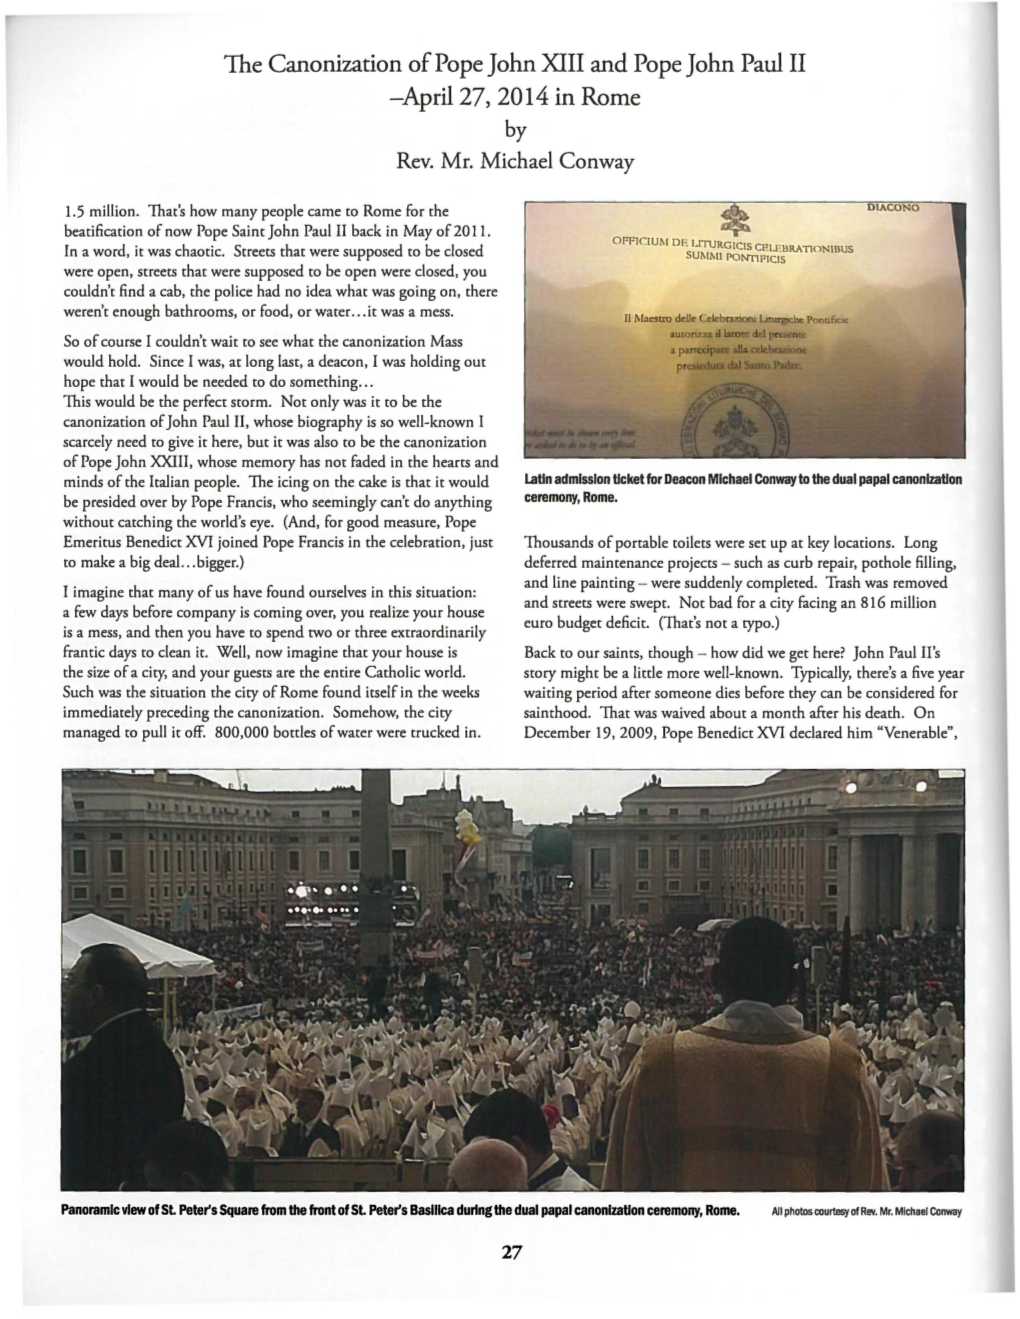 The Canonization of Pope John XIII and Pope John Paul II -April 27, 2014 in Rome by Rev